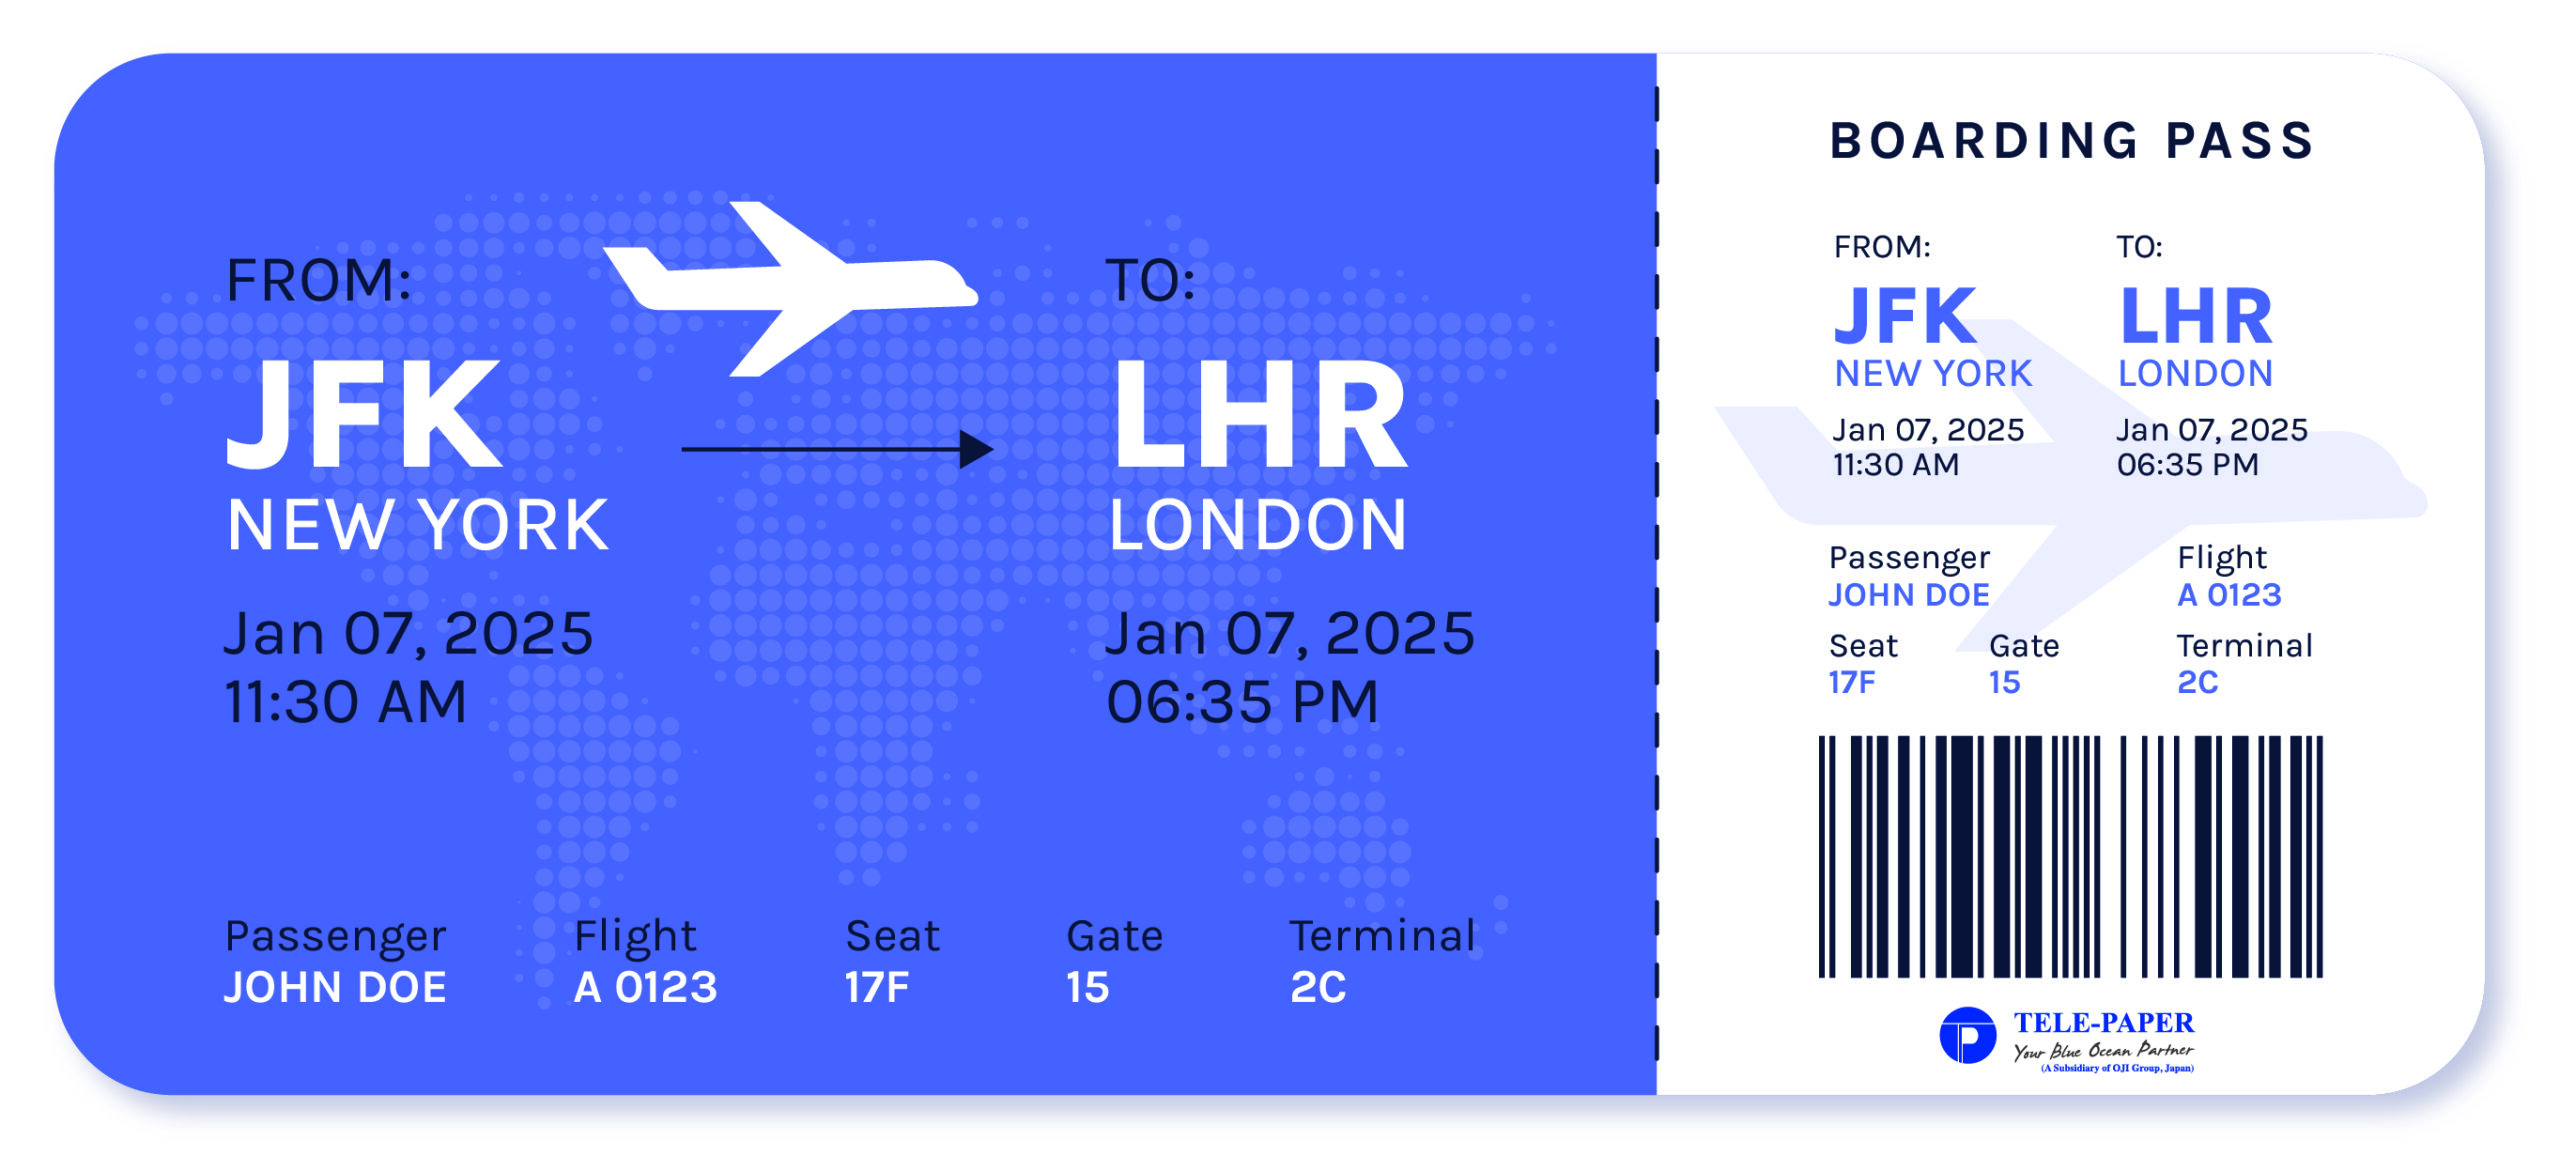 Types of Boarding Pass